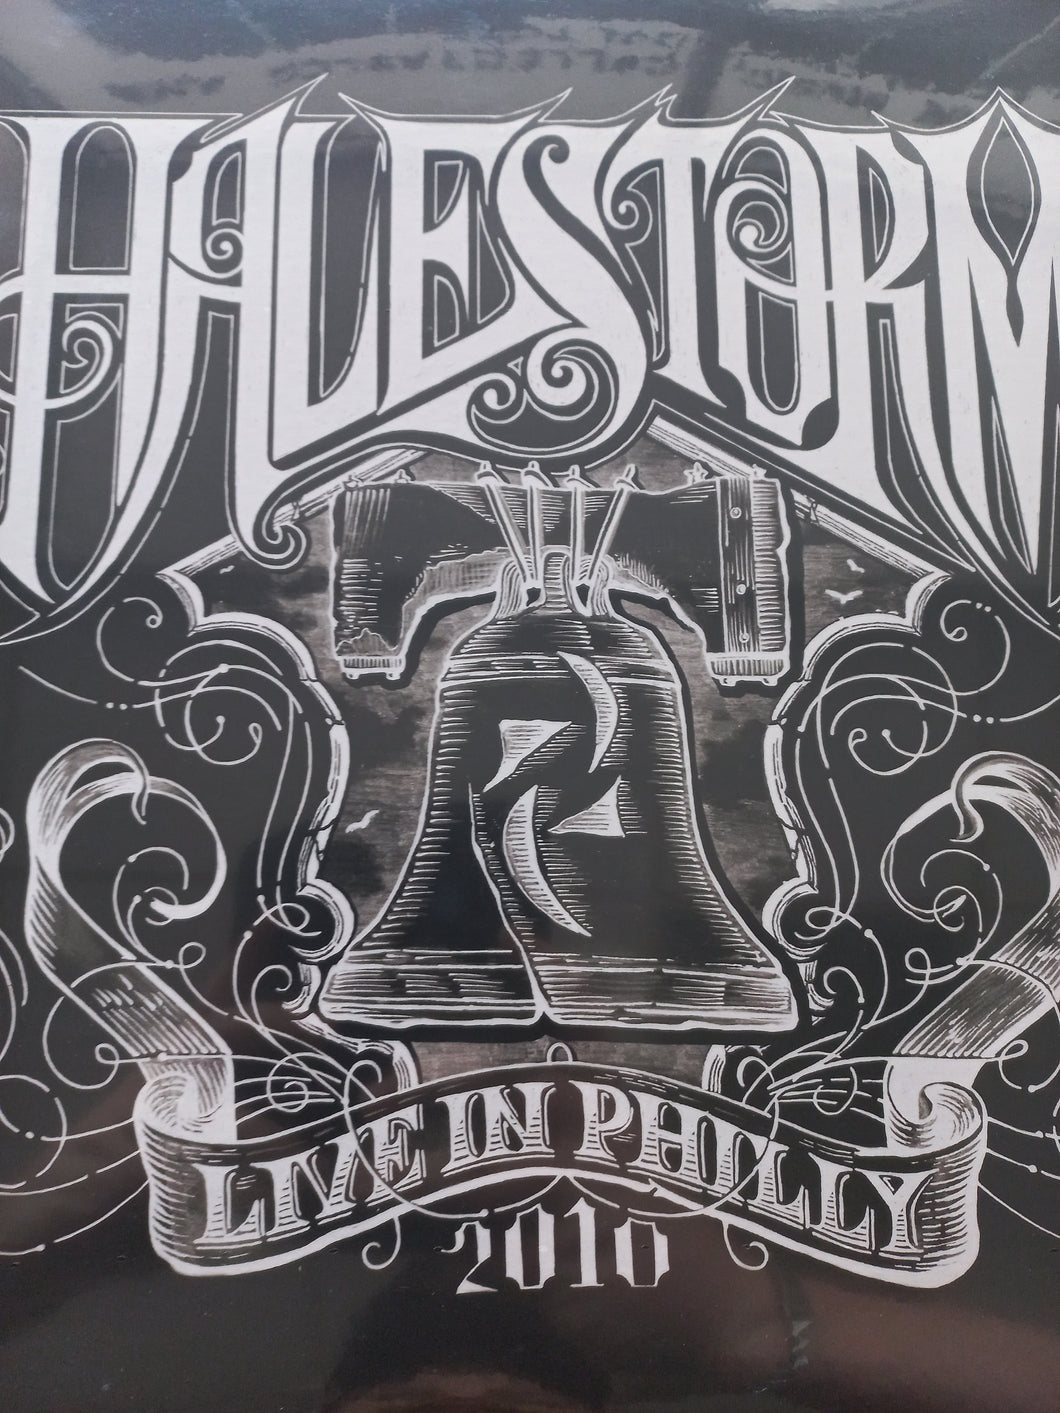 Halestorm - Live in Philly